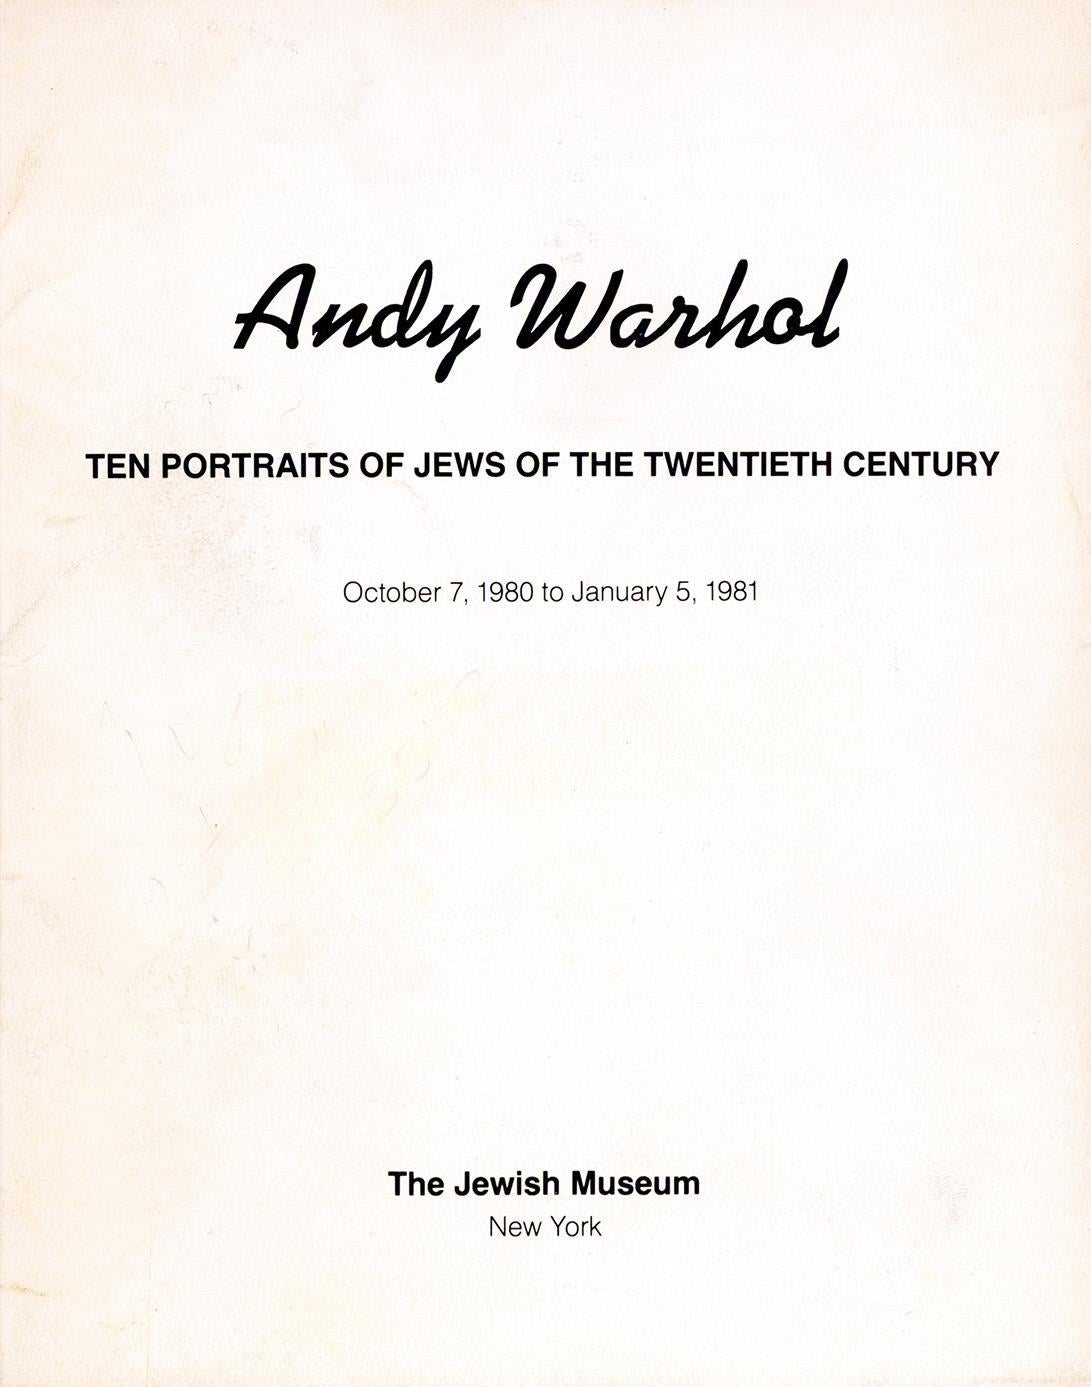 Andy Warhol Portraits of Jews of the 20th Century (announcements; Signed cover) 8